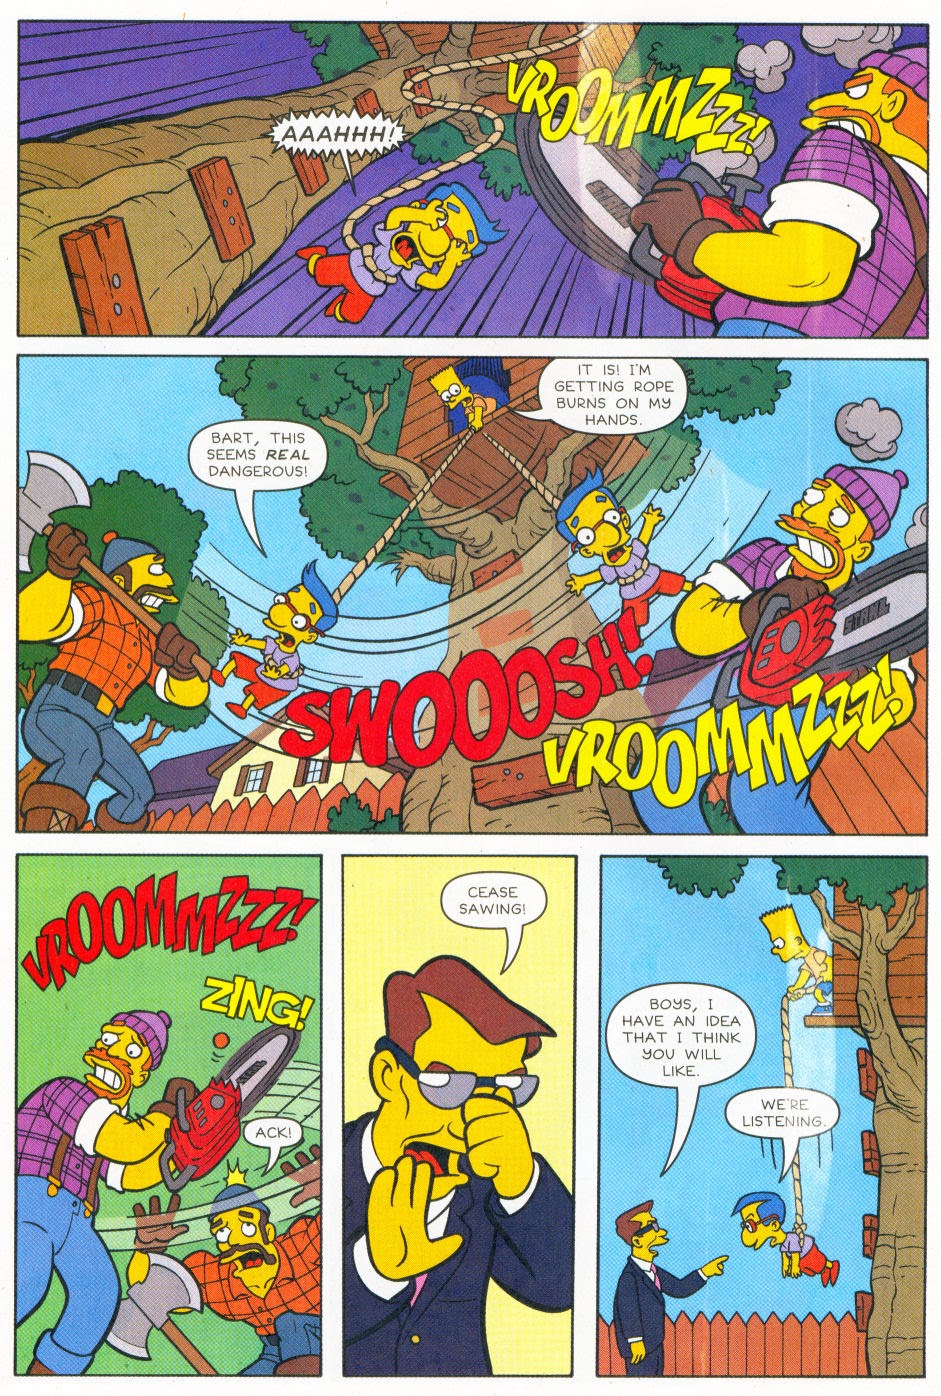 Read online Bart Simpson comic -  Issue #26 - 7